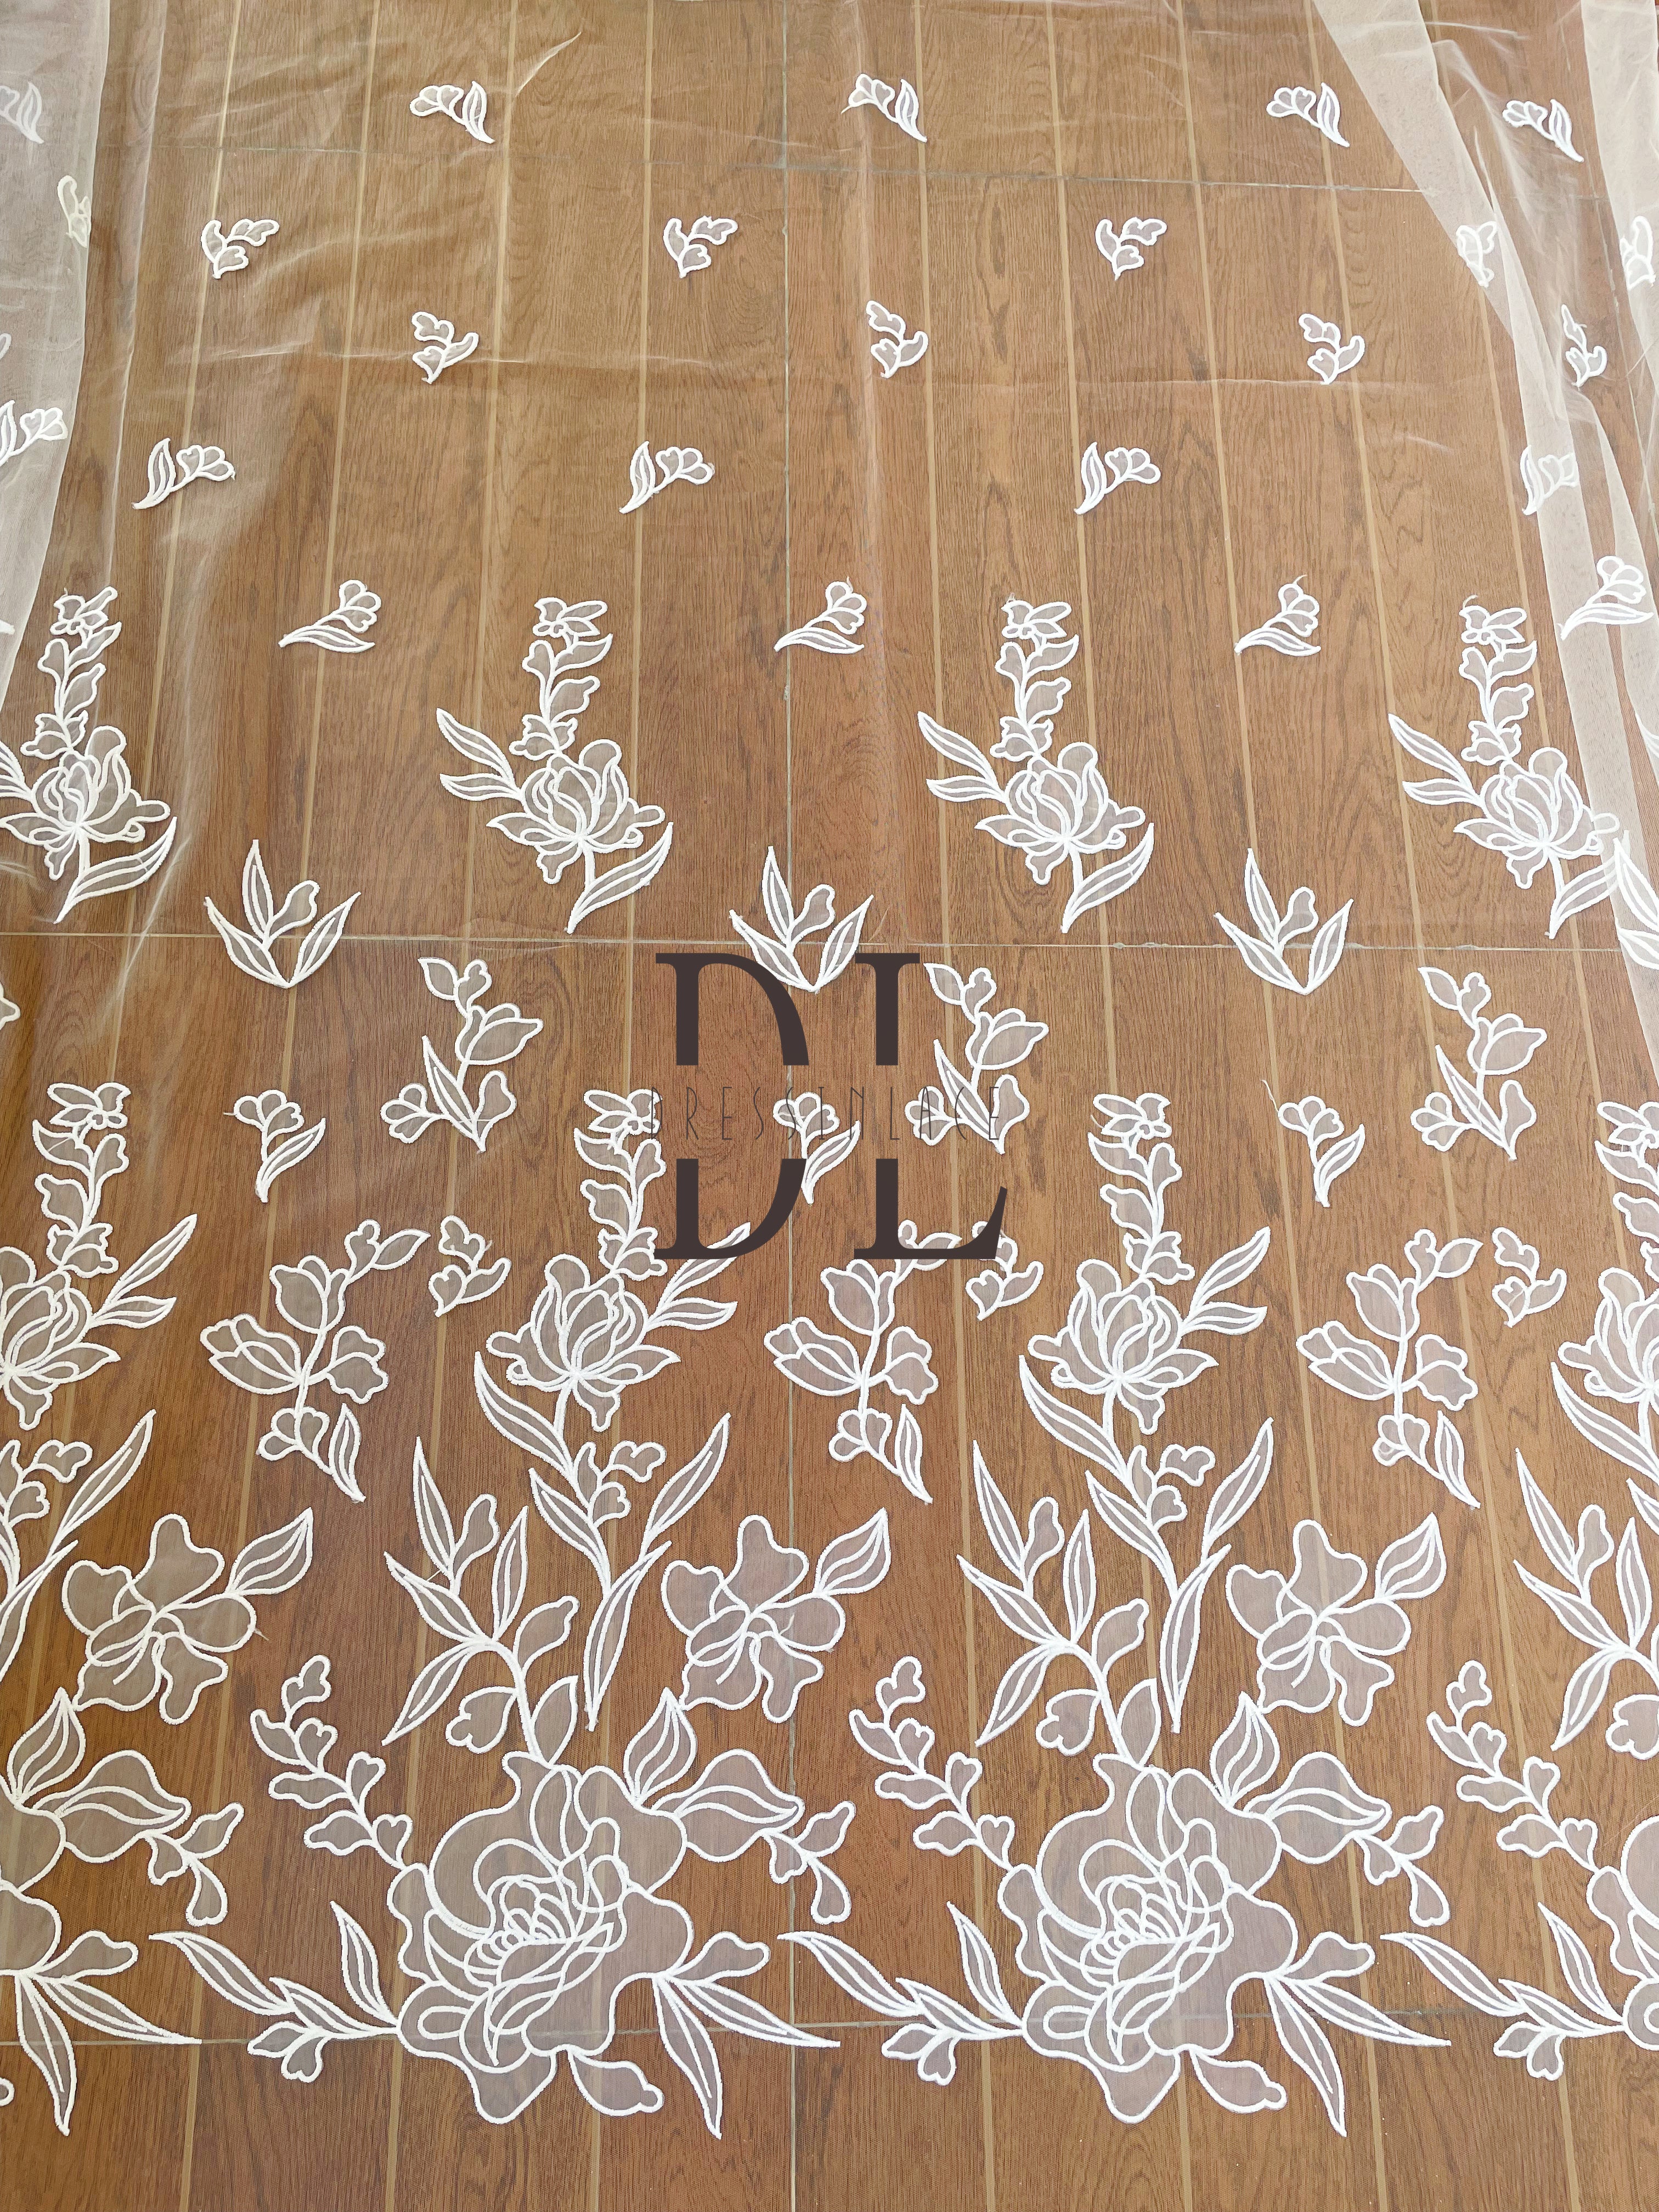 DL130132 Lace Fabric for Wedding Dresses - Soft and Elegant Satin Laser Fabric Floral Pattern with softy mesh